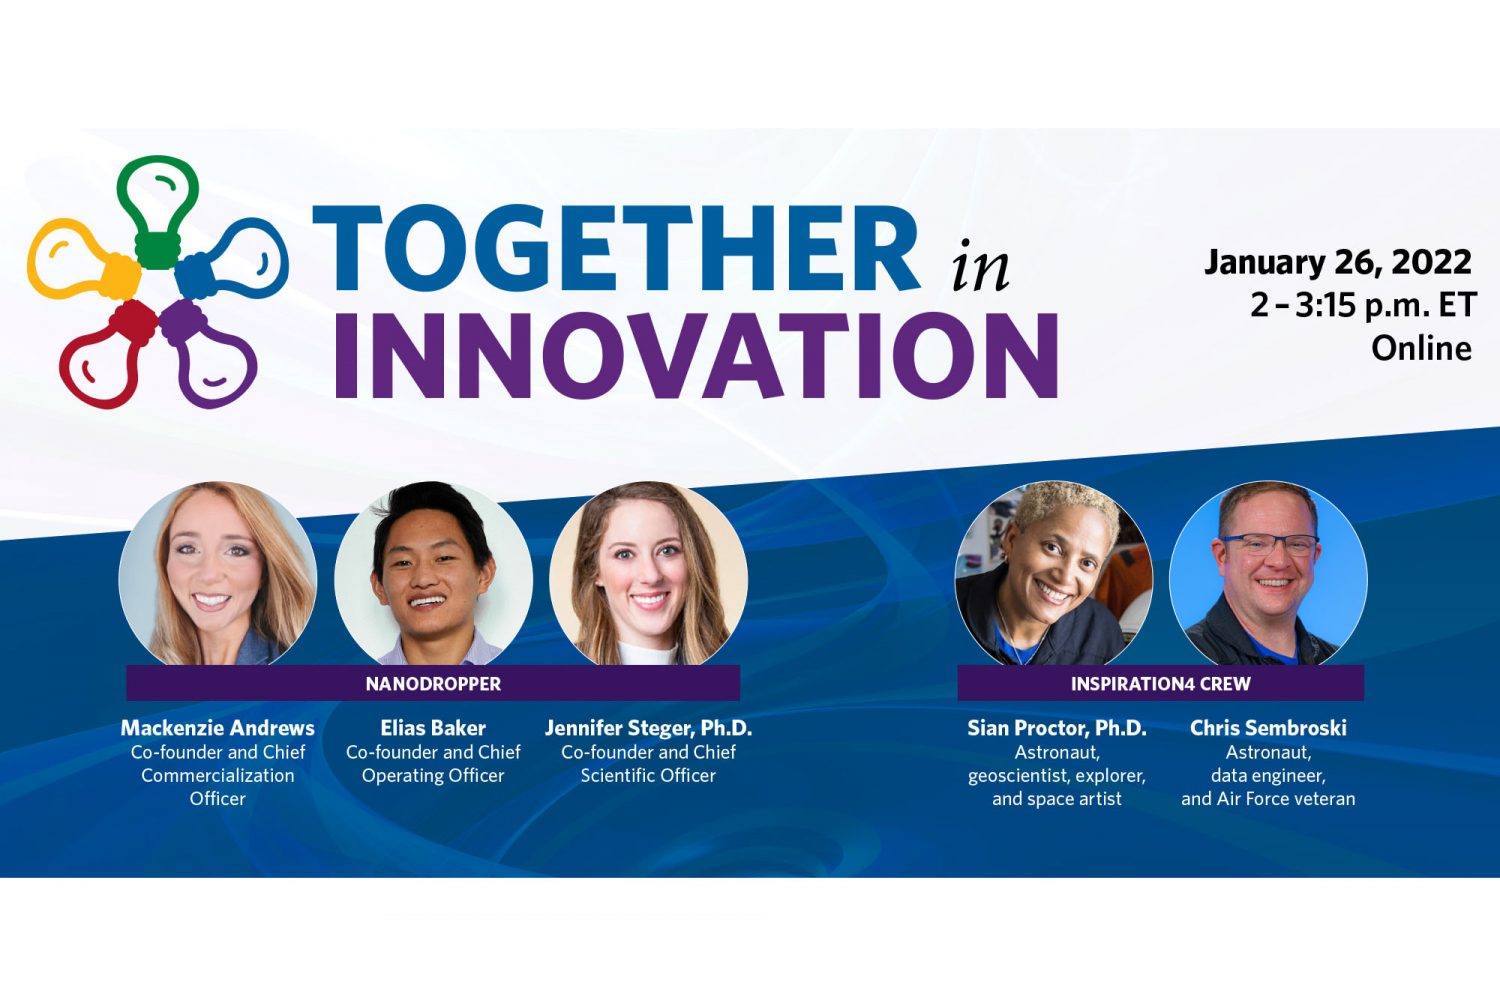 Together in Innovation - January 26, 2022, 2-3:15 p.m. ET - Online - Head shots of Mackenzie Andrews, Elias Baker, and Jennifer Steger, Ph.D., Nanodropper; and Sian Proctor, Ph.D., and Chris Sembroski, Inspiration4 Crew